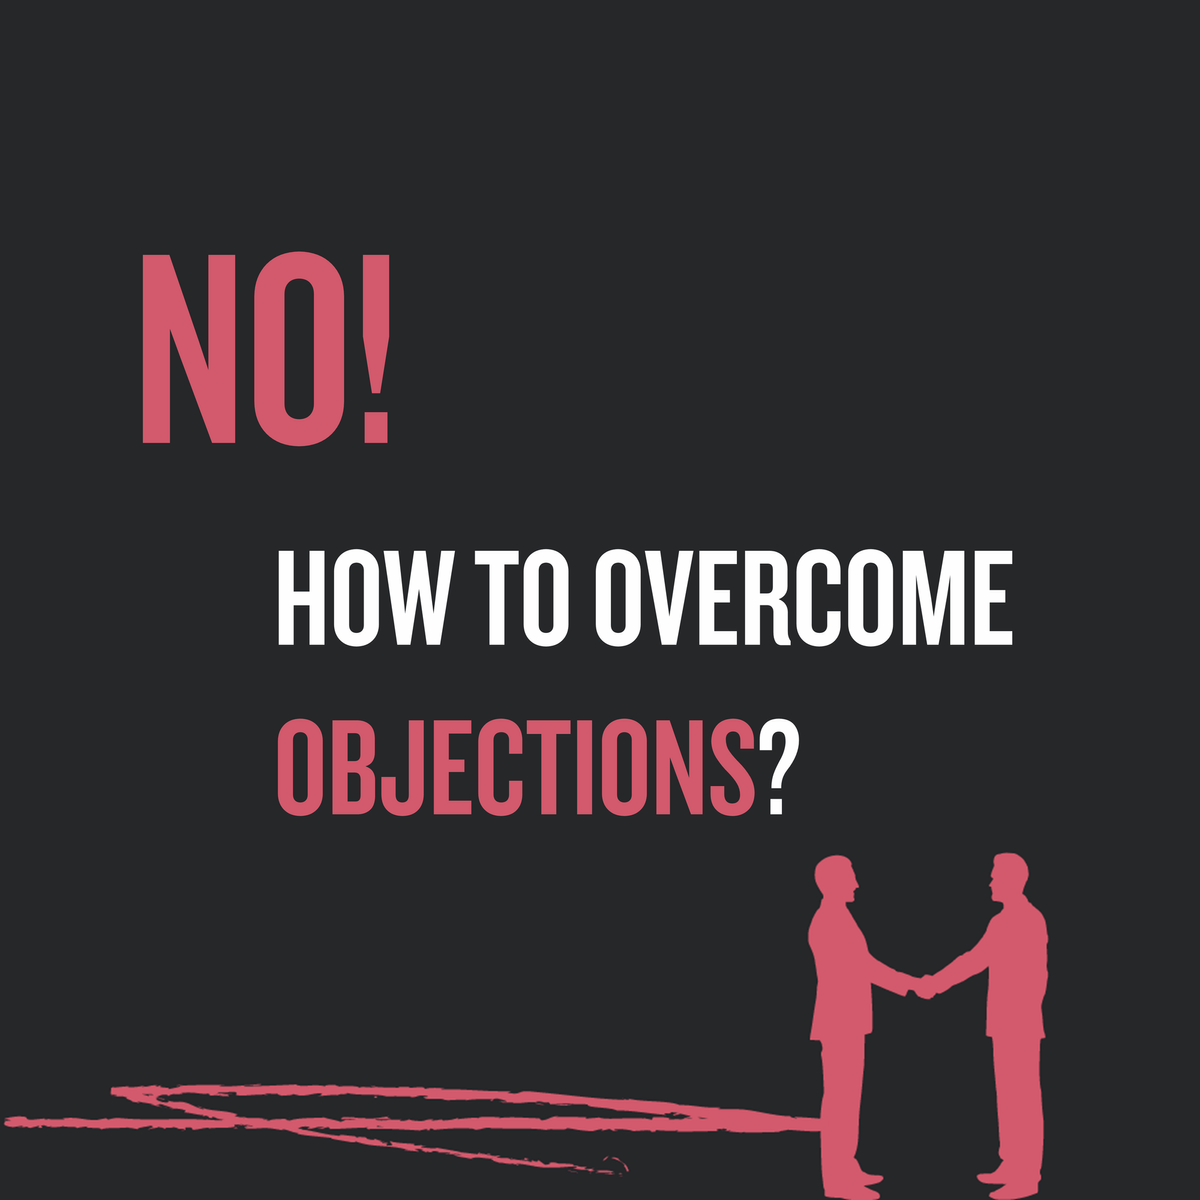 No! How To Overcome Objections?